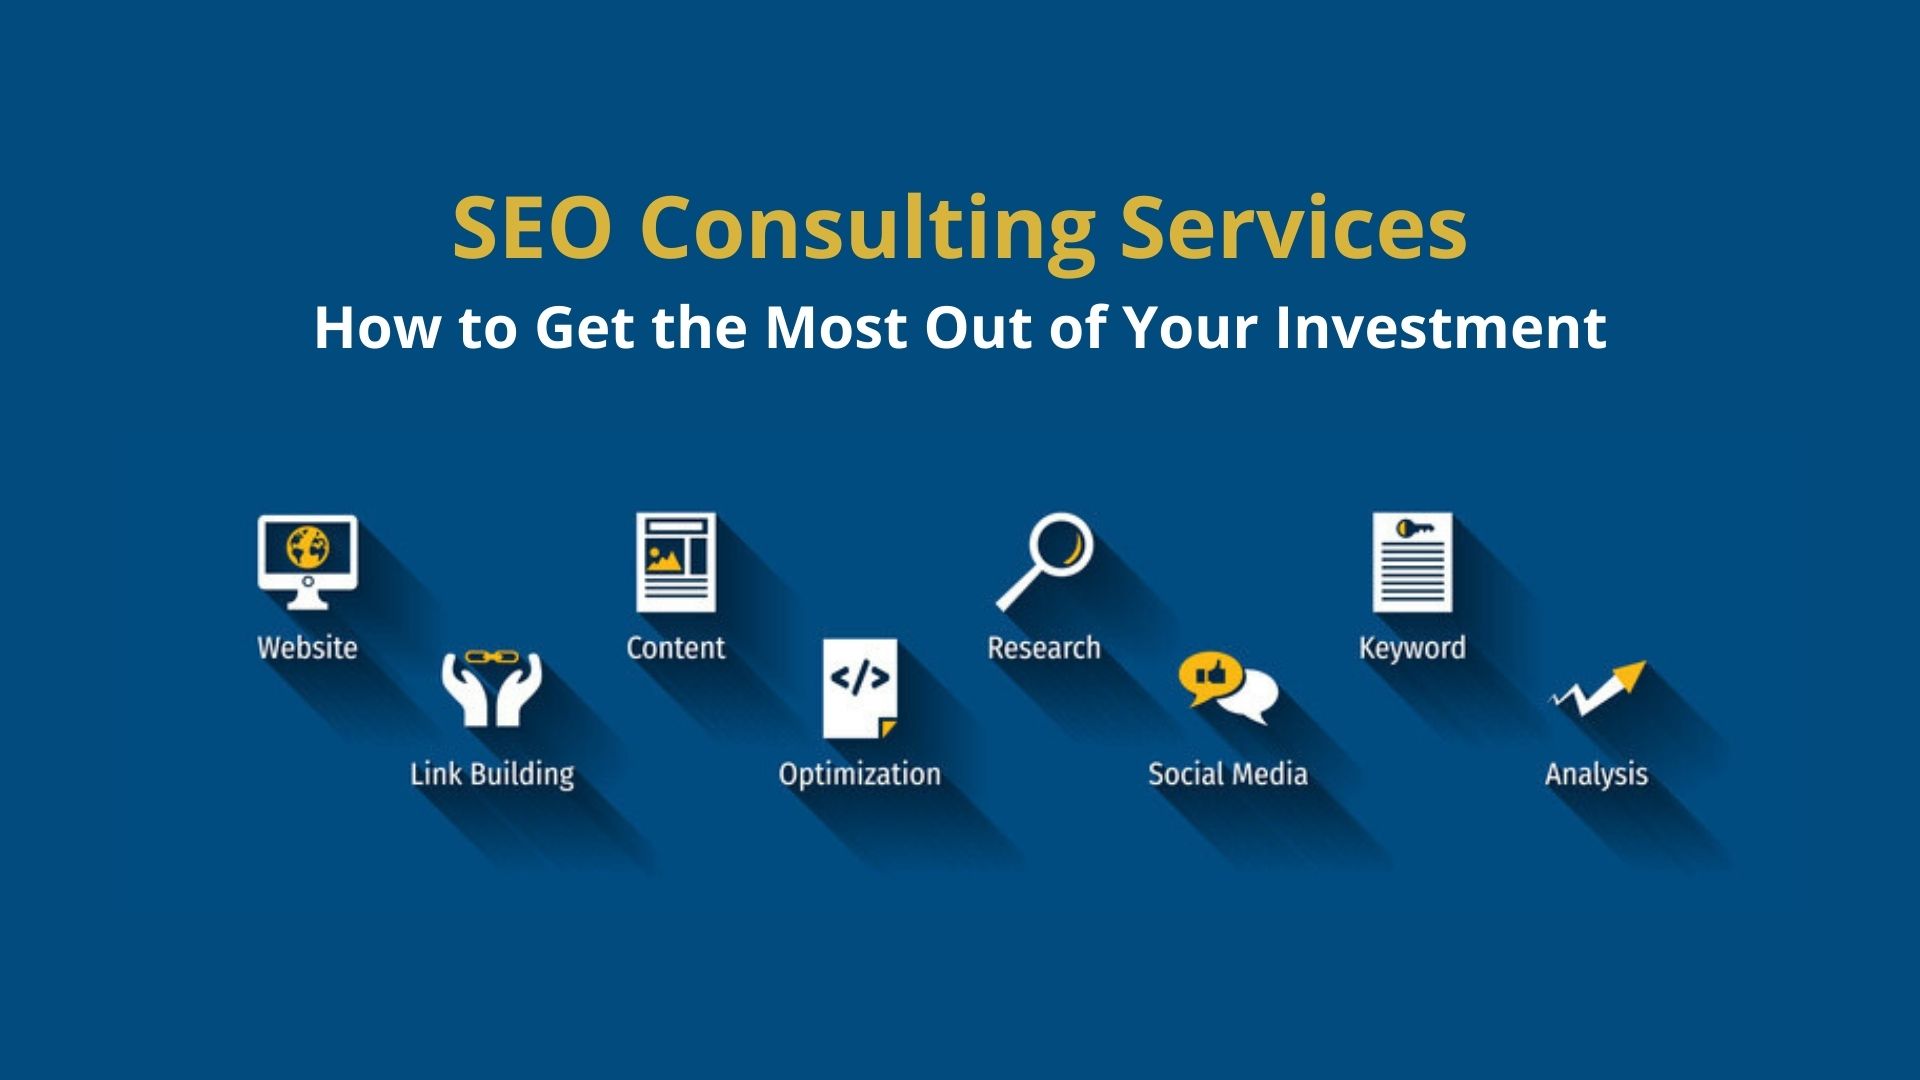 Design of SEO consulting services